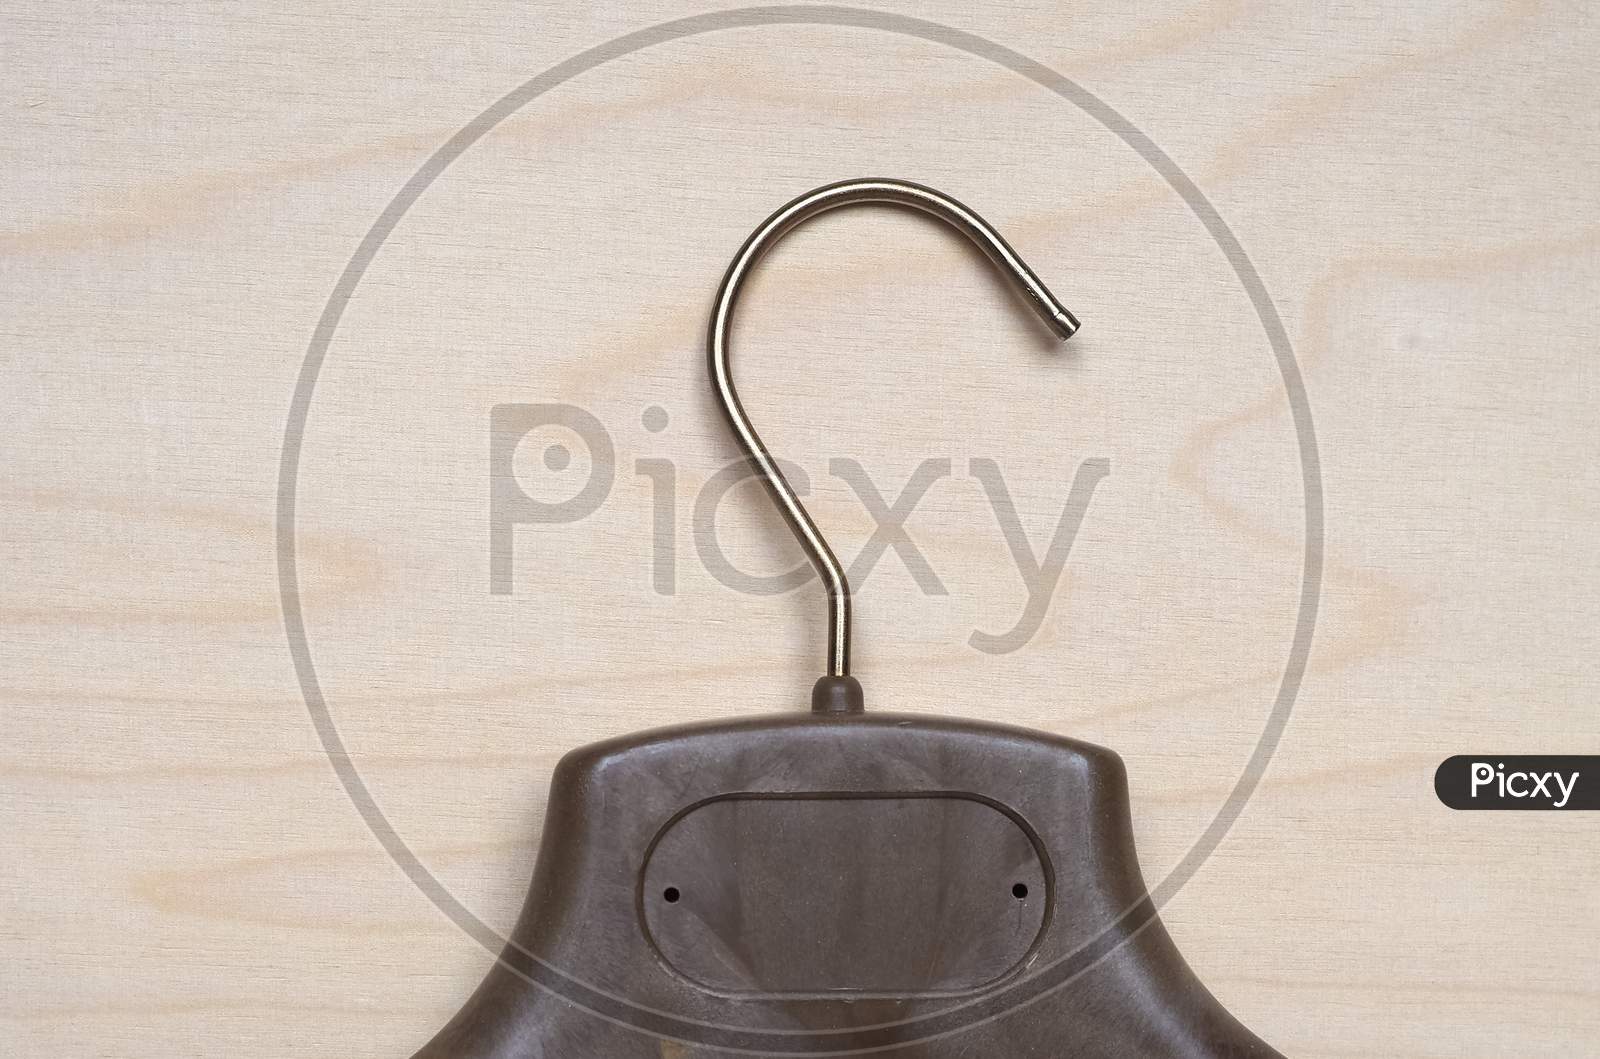 Clothes Hanger With Copy Space